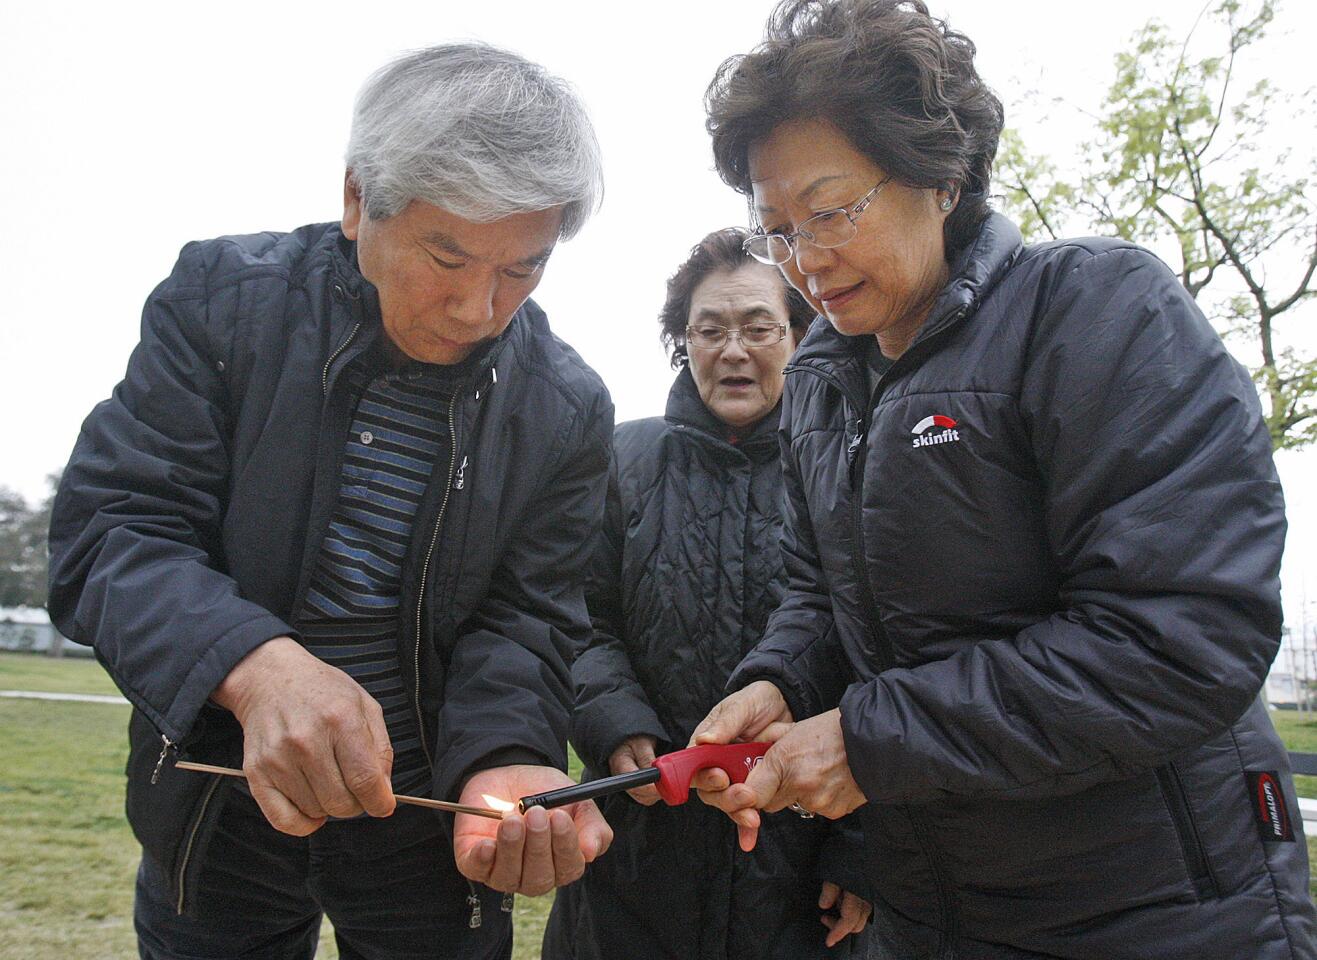 Kuk Jo and Jong Jo, of Long Beach and behind the Soo Kim, of Los Angeles, light incense Hwang Keum-ja, one of 55 remaining comfort women survivors who died on Jan 25 in Korea, at the Comfort Women Statue in Central Park in Glendale on Thursday, January 30, 2014. (Tim Berger/Staff Photographer)